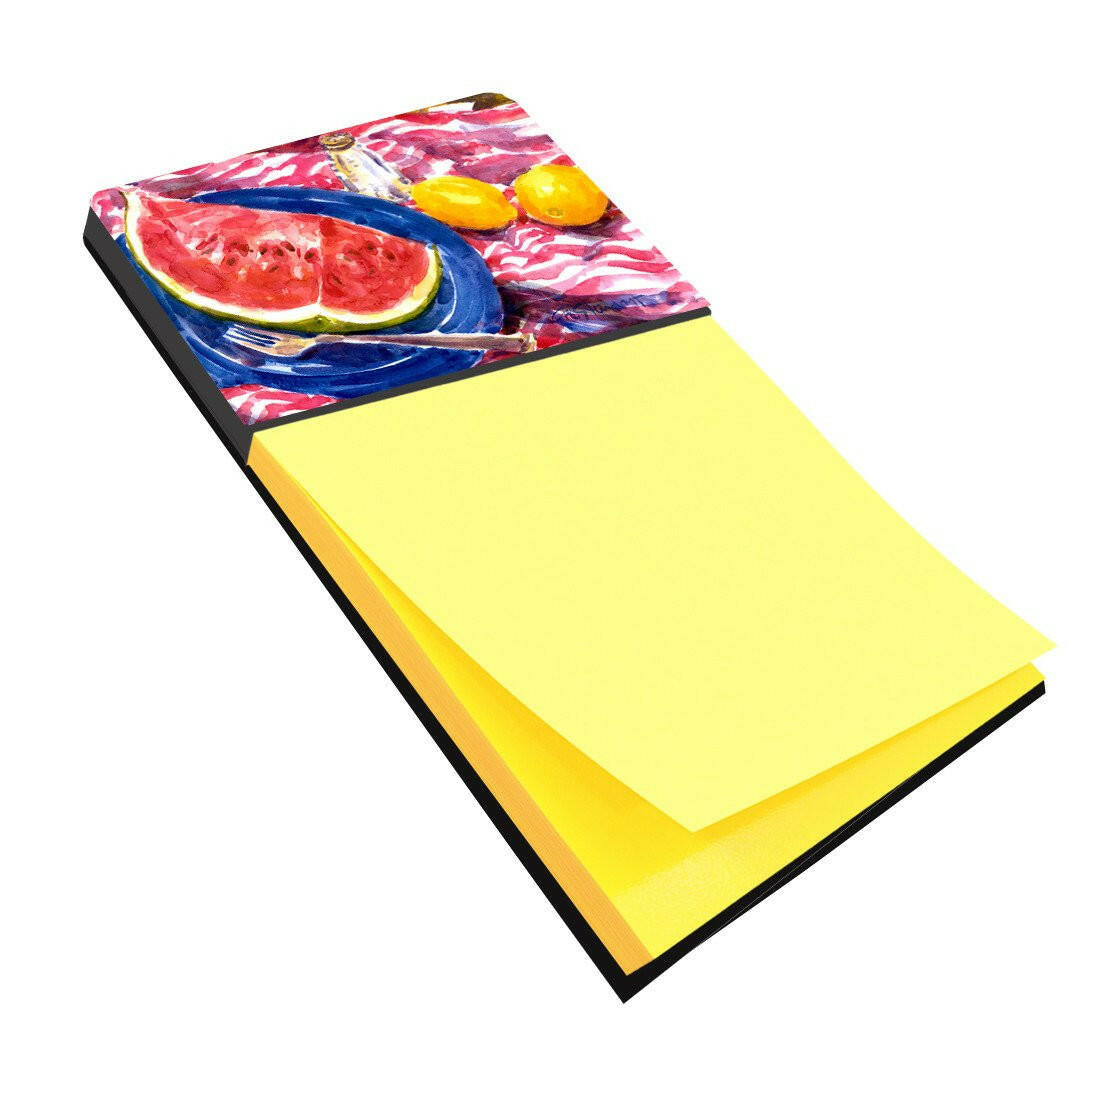 Watermelon Refiillable Sticky Note Holder or Postit Note Dispenser 6028SN by Caroline's Treasures